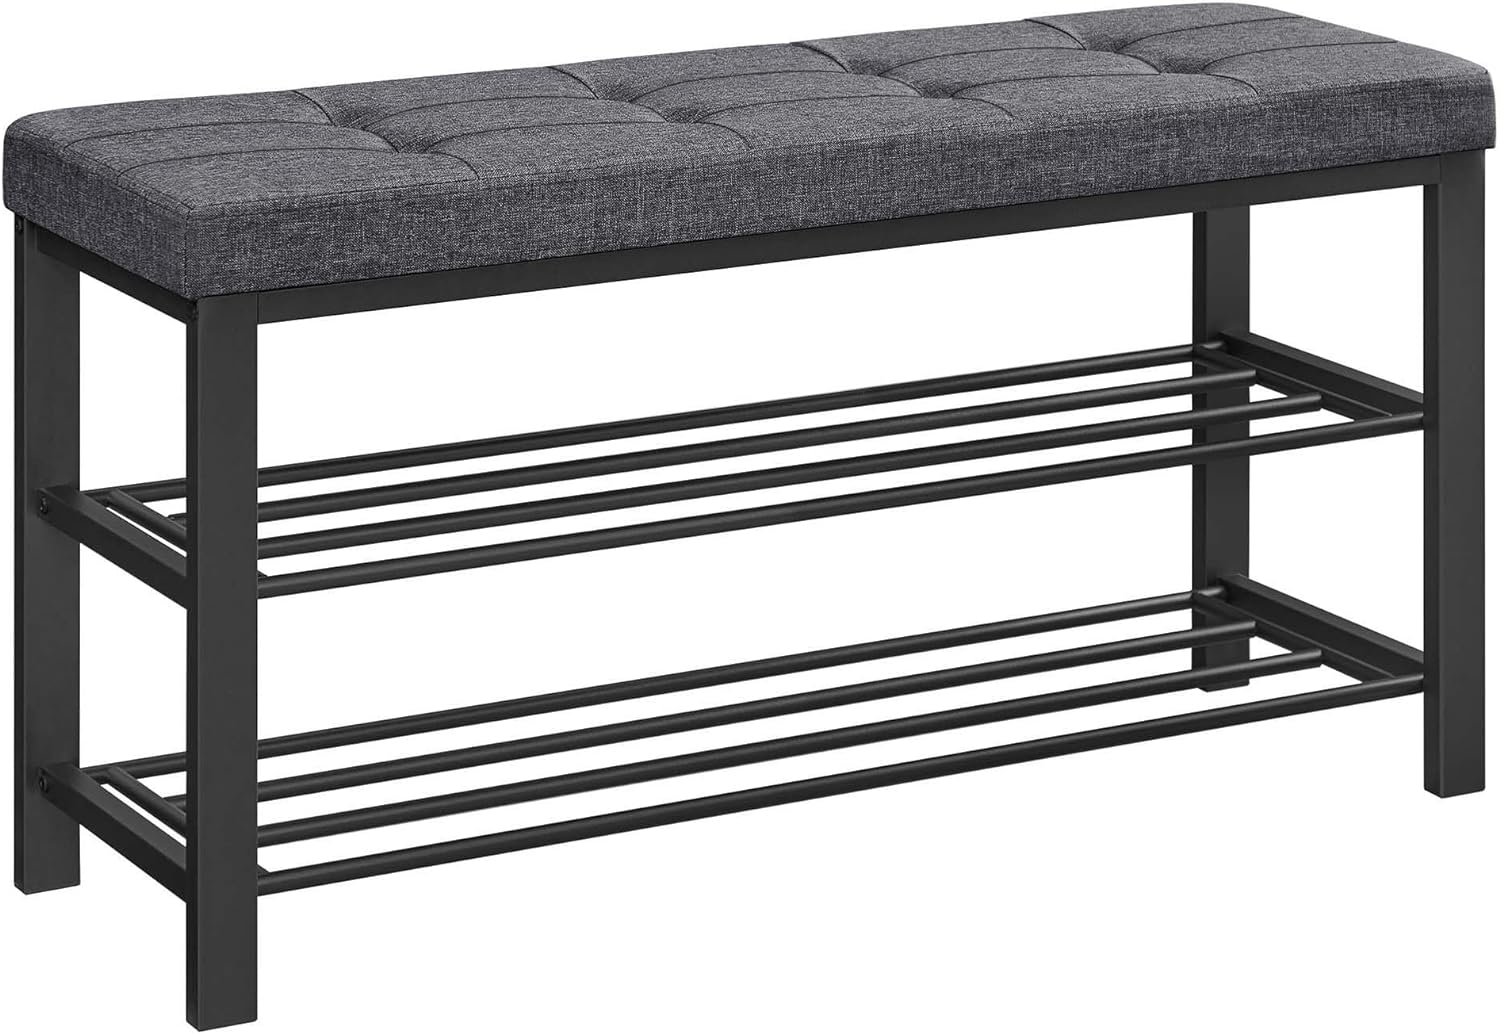 https://bigbigmart.com/wp-content/uploads/2023/10/SONGMICS-Shoe-Bench-3-Tier-Shoe-Rack-for-Entryway-Storage-Organizer-with-Foam-Padded-Seat-Linen-Metal-Frame-for-Living-Room-Hallway-12.2-x-39.4-x-19.3-Inches-Dark-Gray-and-Black-ULBS579B33.jpg